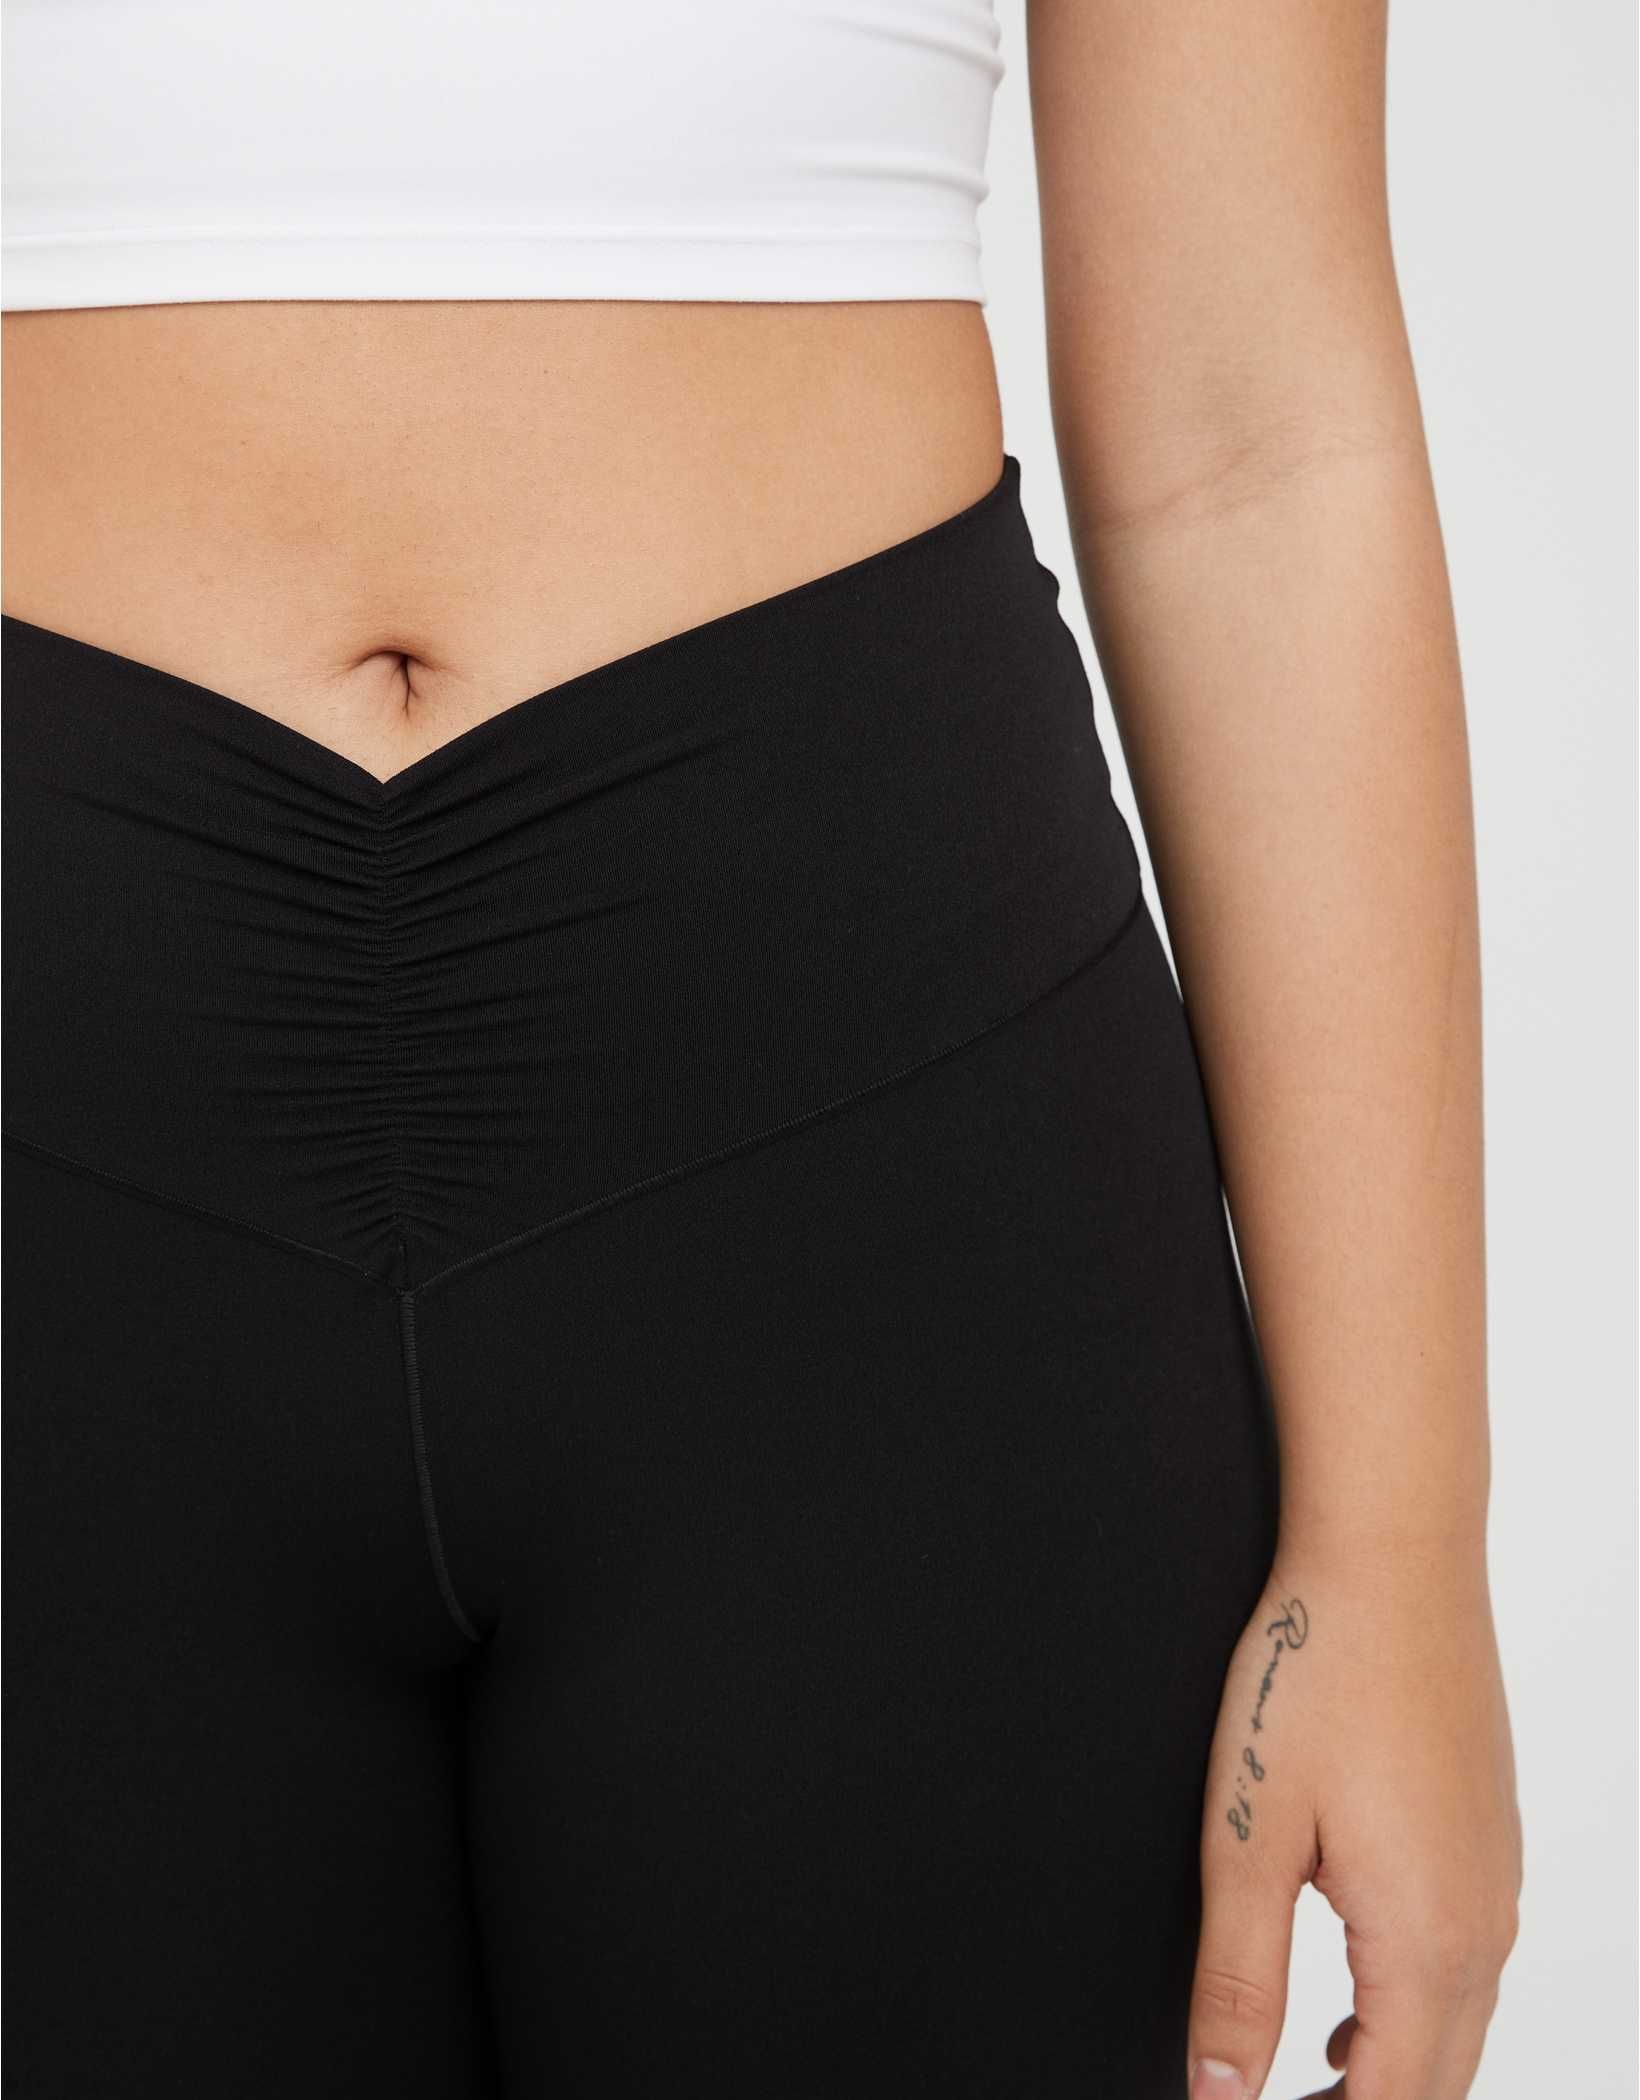 OFFLINE By Aerie Real Me High Waisted Ruched Legging | Aerie